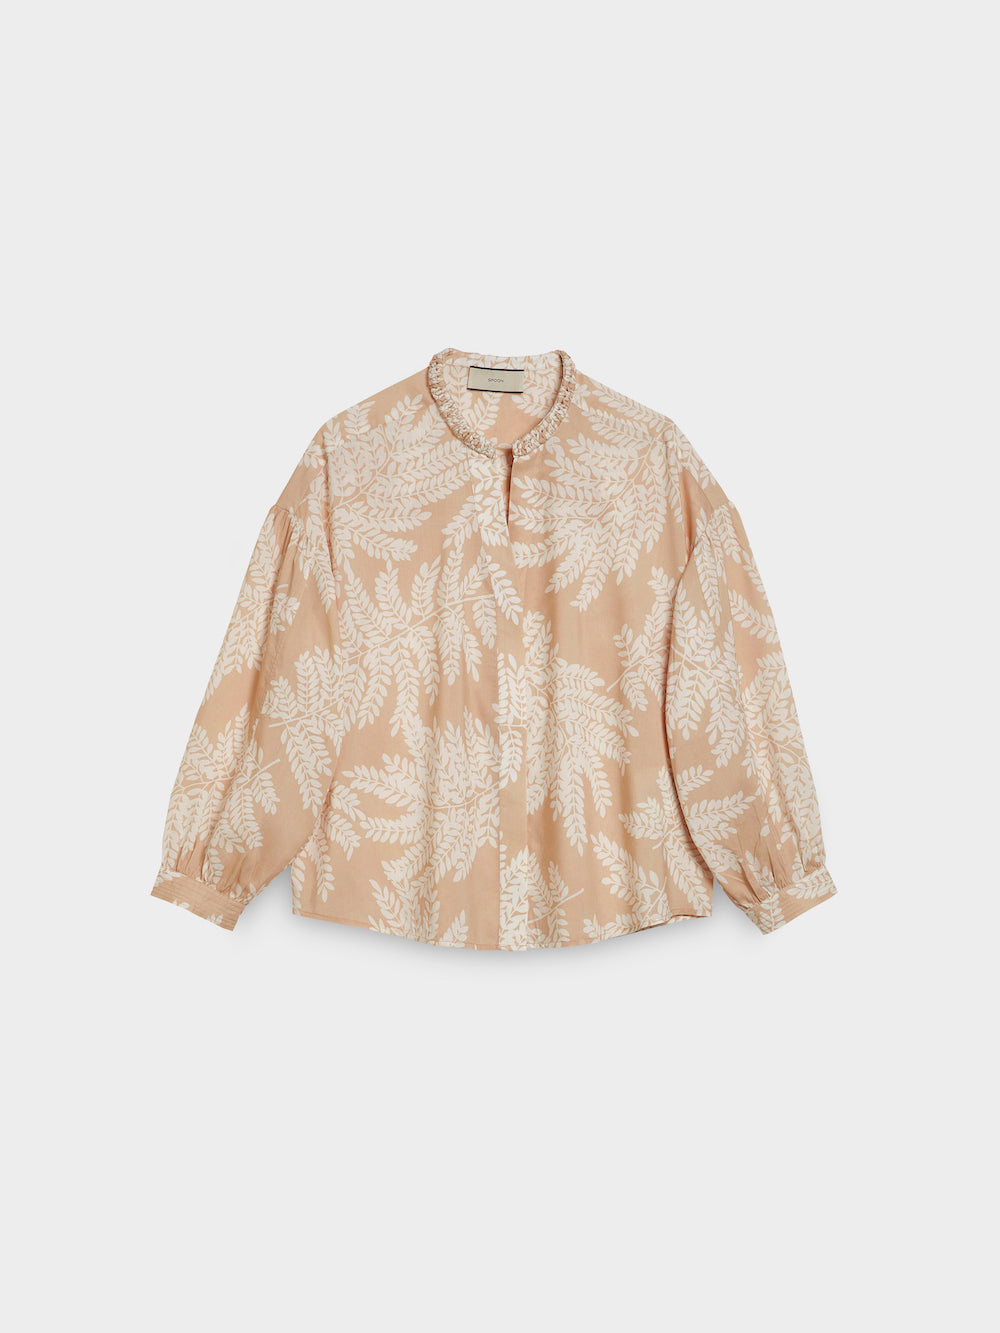 Floral Print Batiste Blouse with Macrame Collar